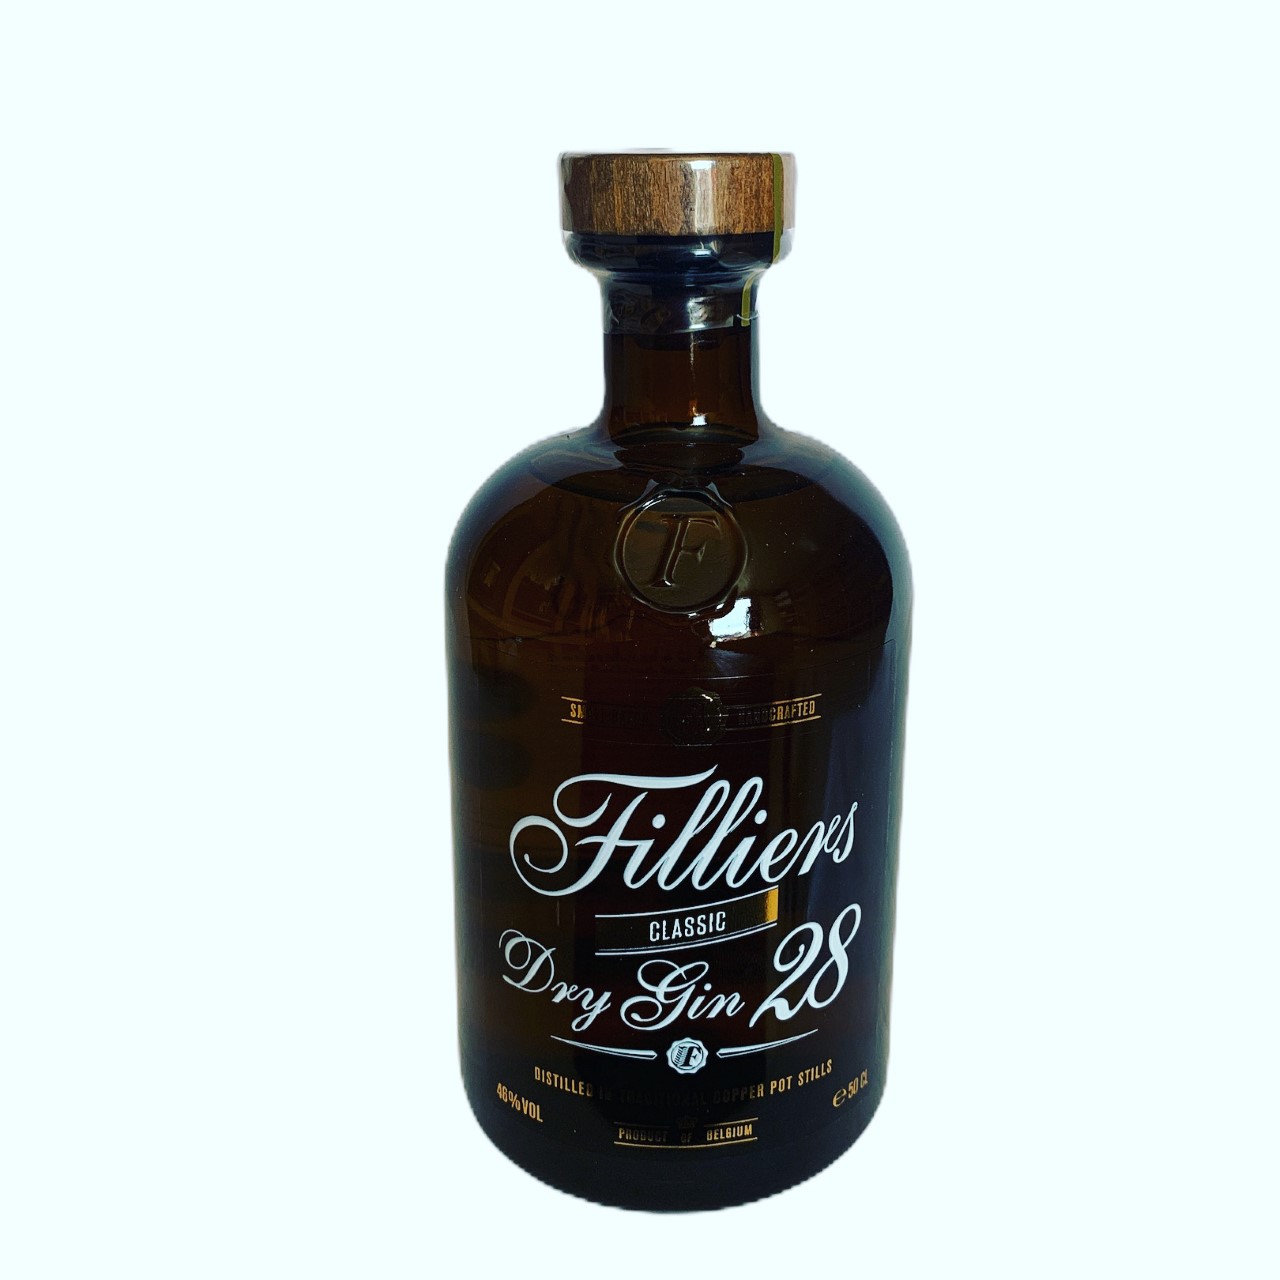 Filliers Dry Gin 28 46% 50cl